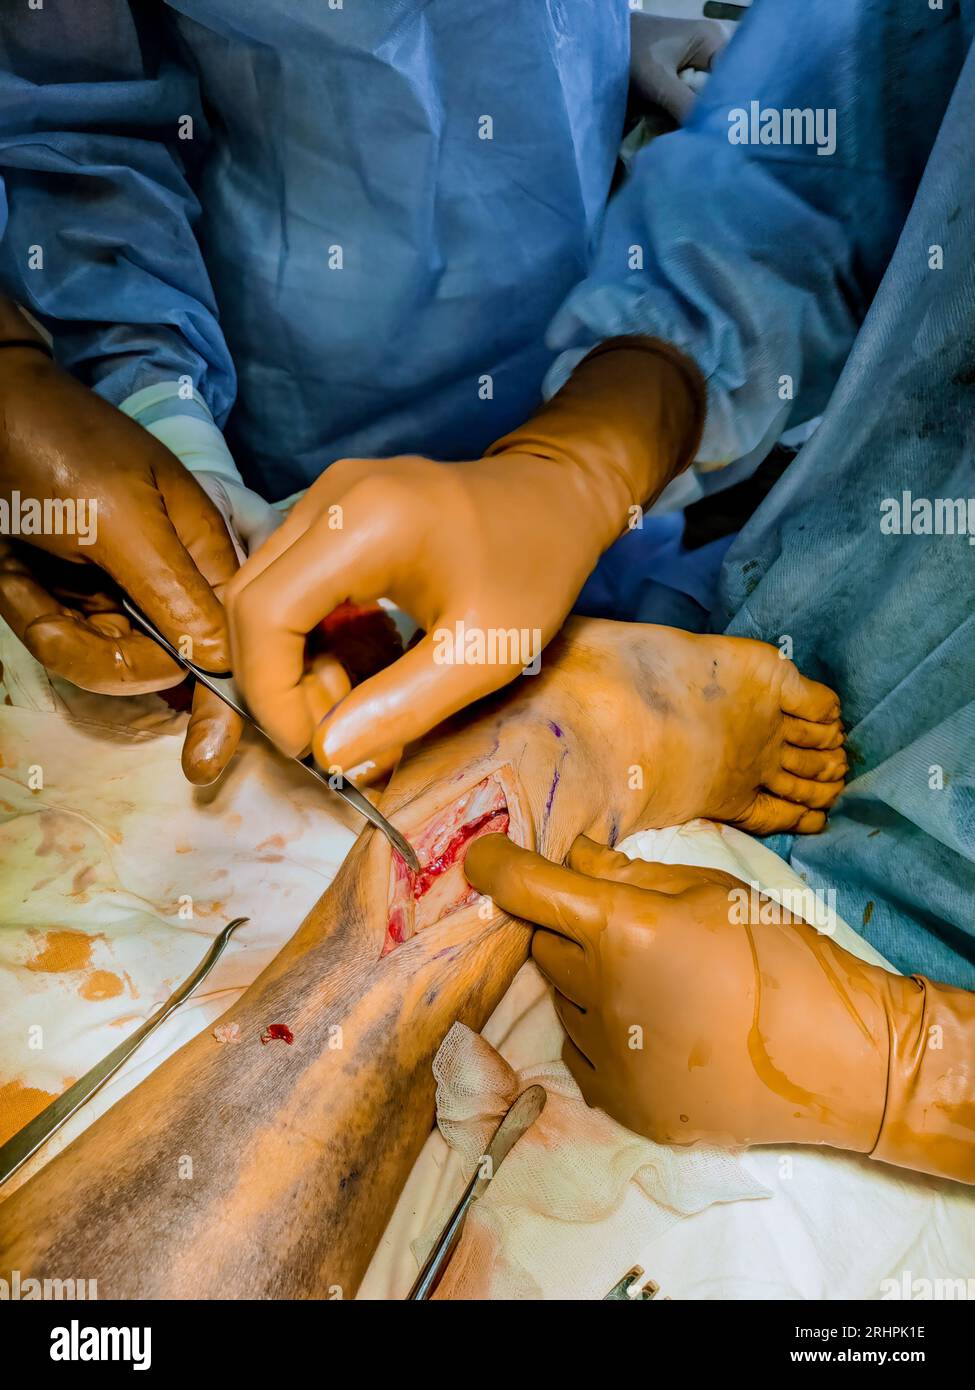 When faced with leg fracture, surgeons opt for installation of metal plate during surgery. Stock Photo